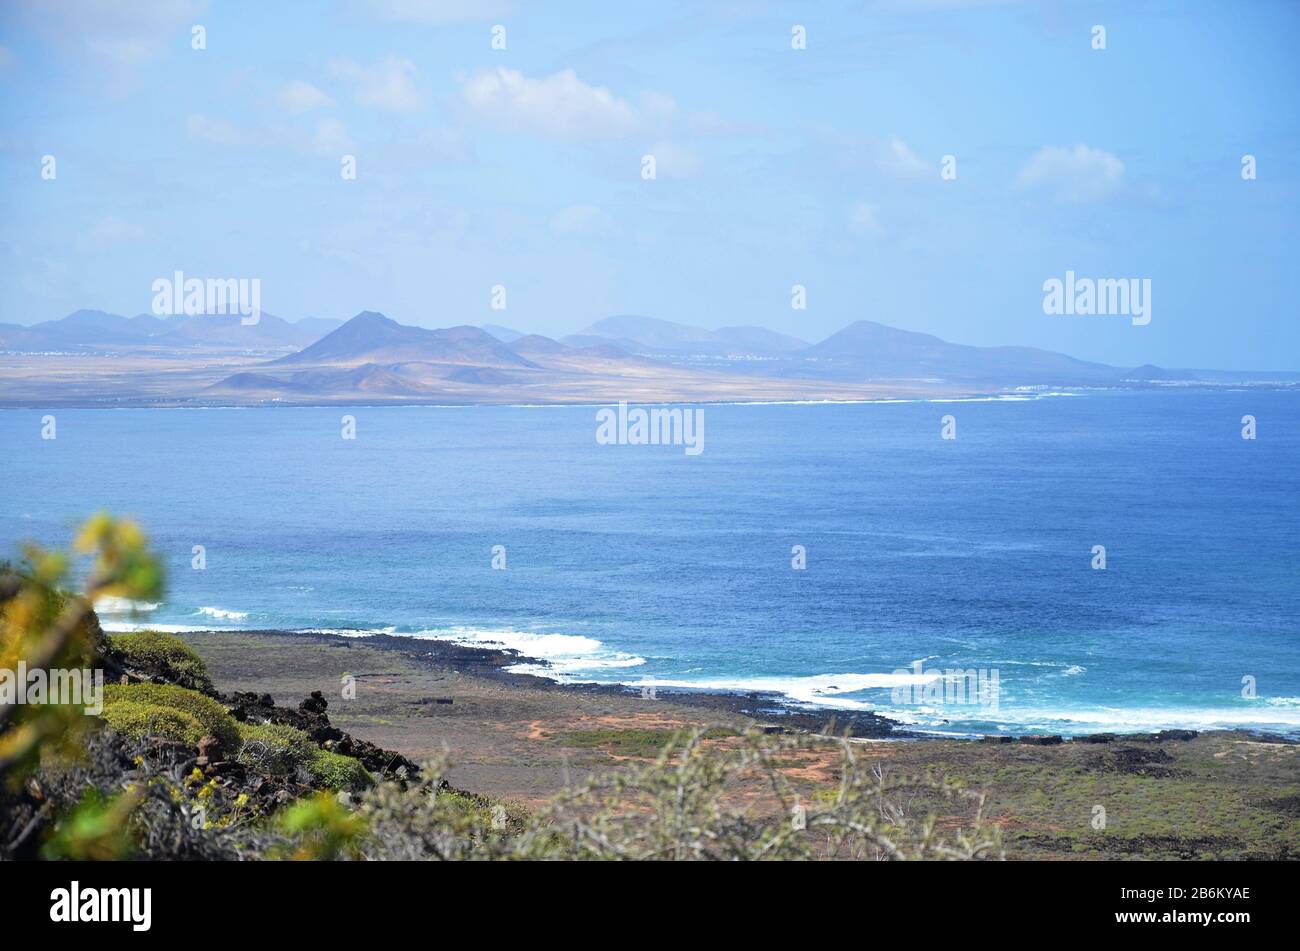 Aerial view from Lanzarote to its neighbour island La Graciosa Stock Photo